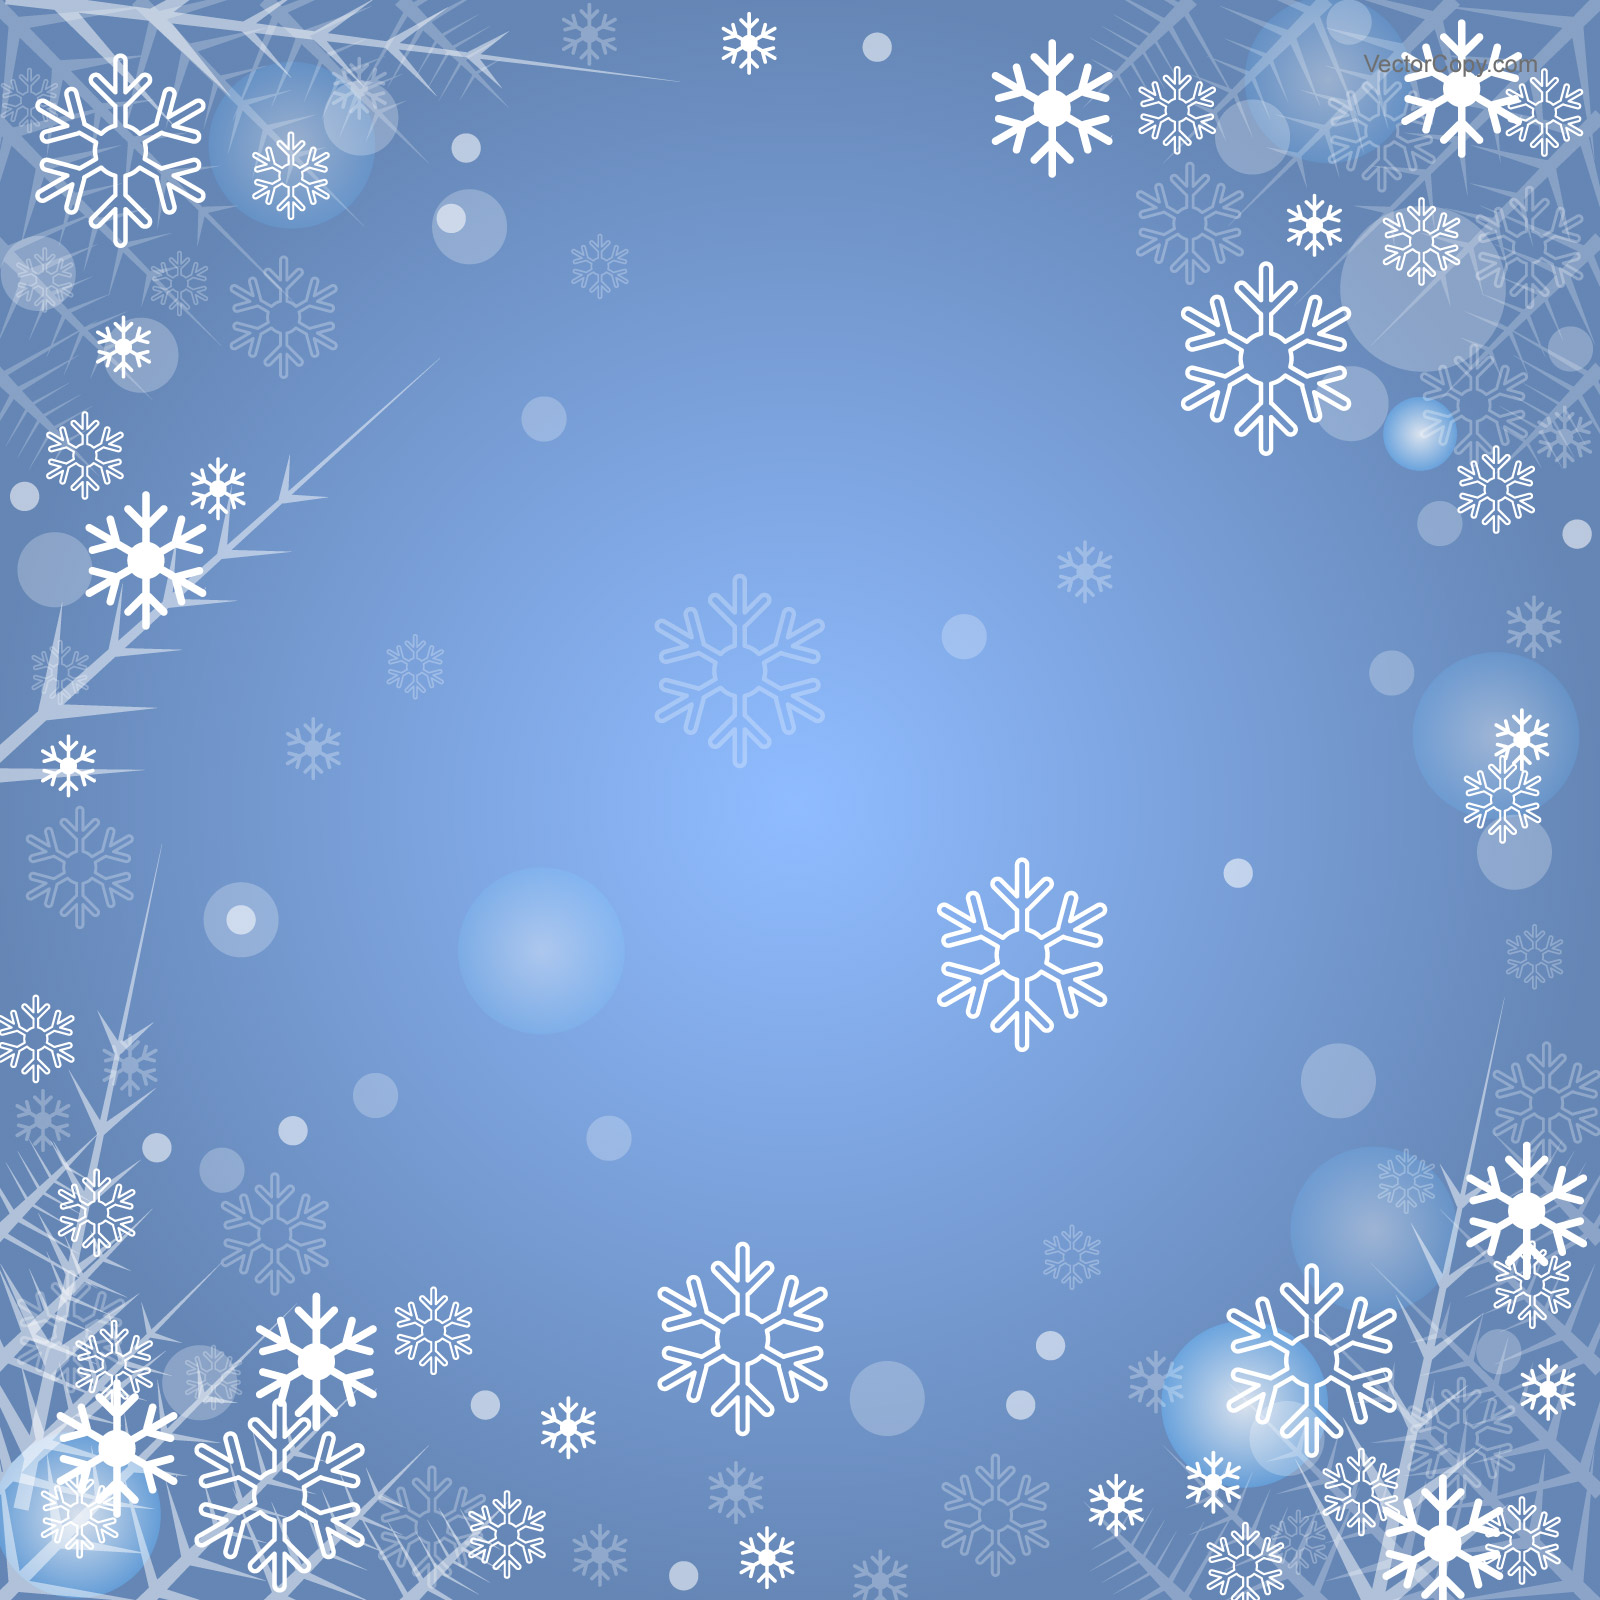 Snowflake Background Pictures To Pin Pinsdaddy